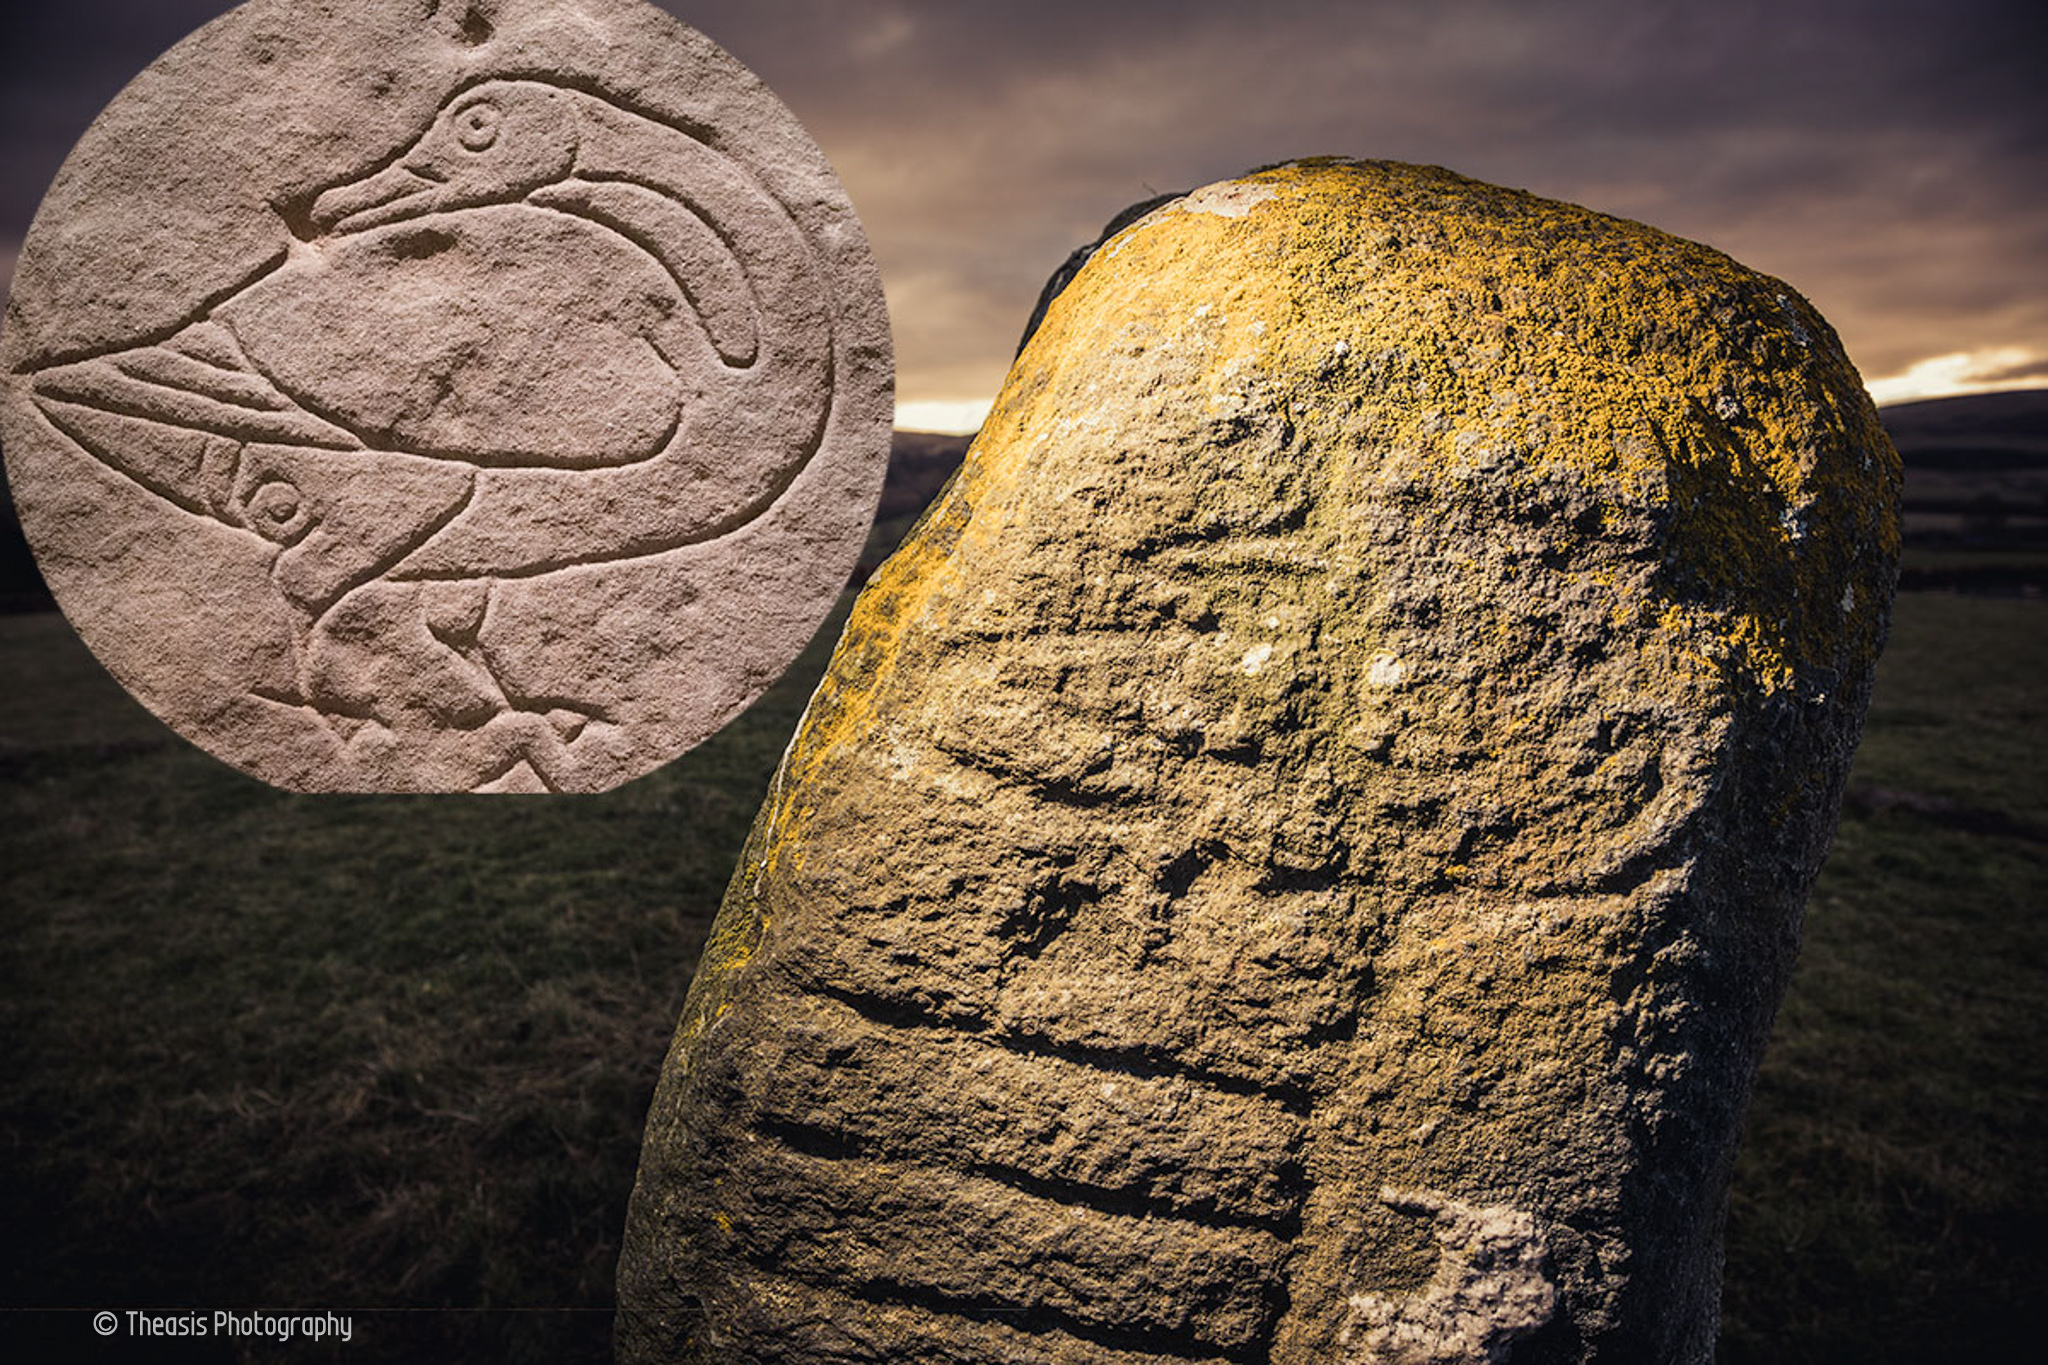 The upper "goose" symbol with an inset of the Pictish goose from the Easterton of Roseisle stone in the National Museum of Scotland for comparison